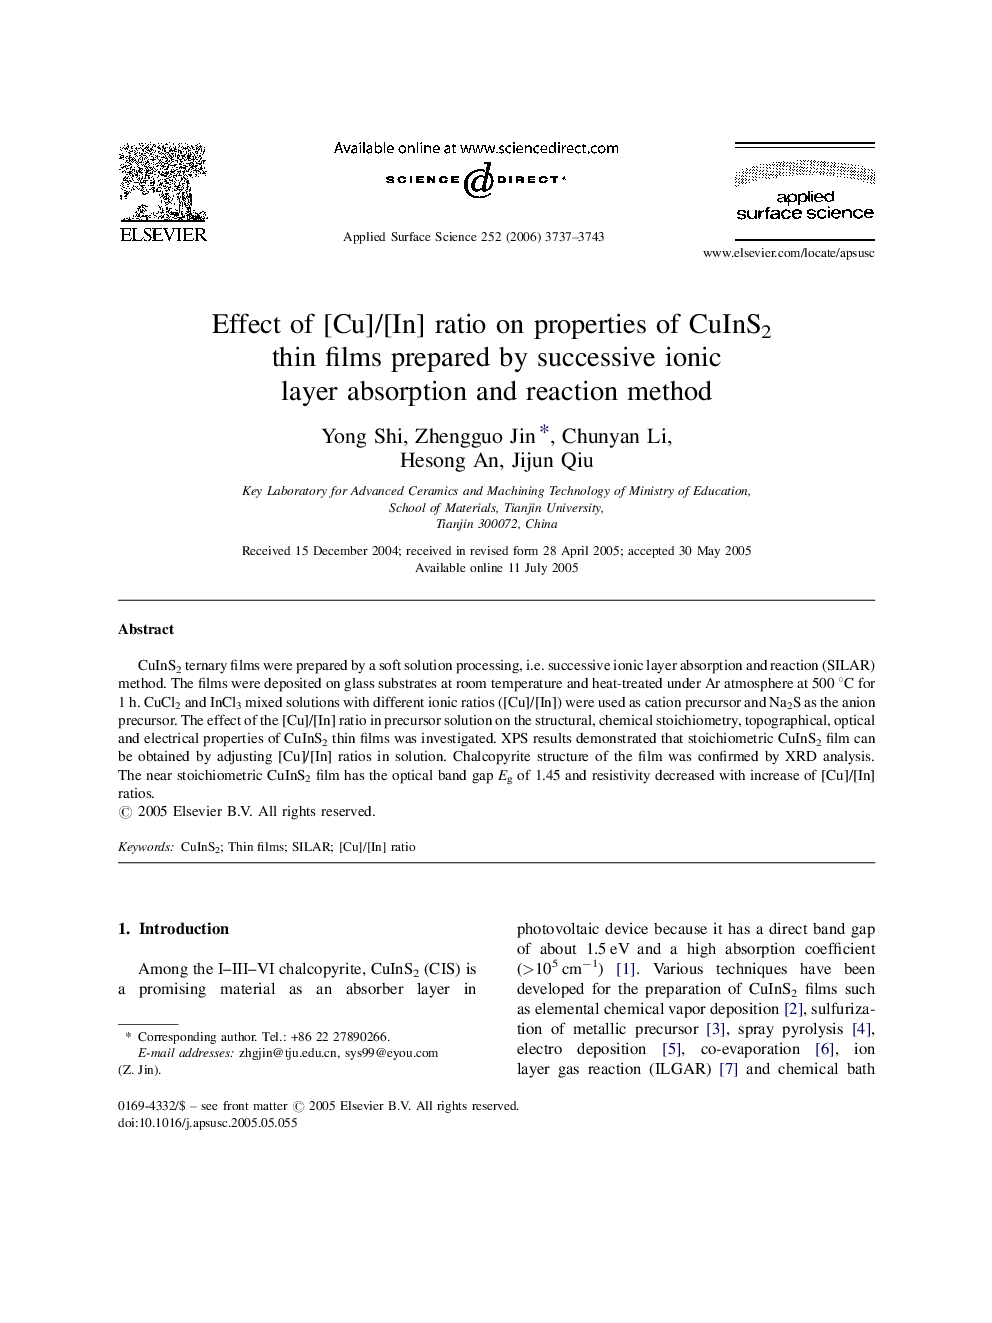 Effect of [Cu]/[In] ratio on properties of CuInS2 thin films prepared by successive ionic layer absorption and reaction method